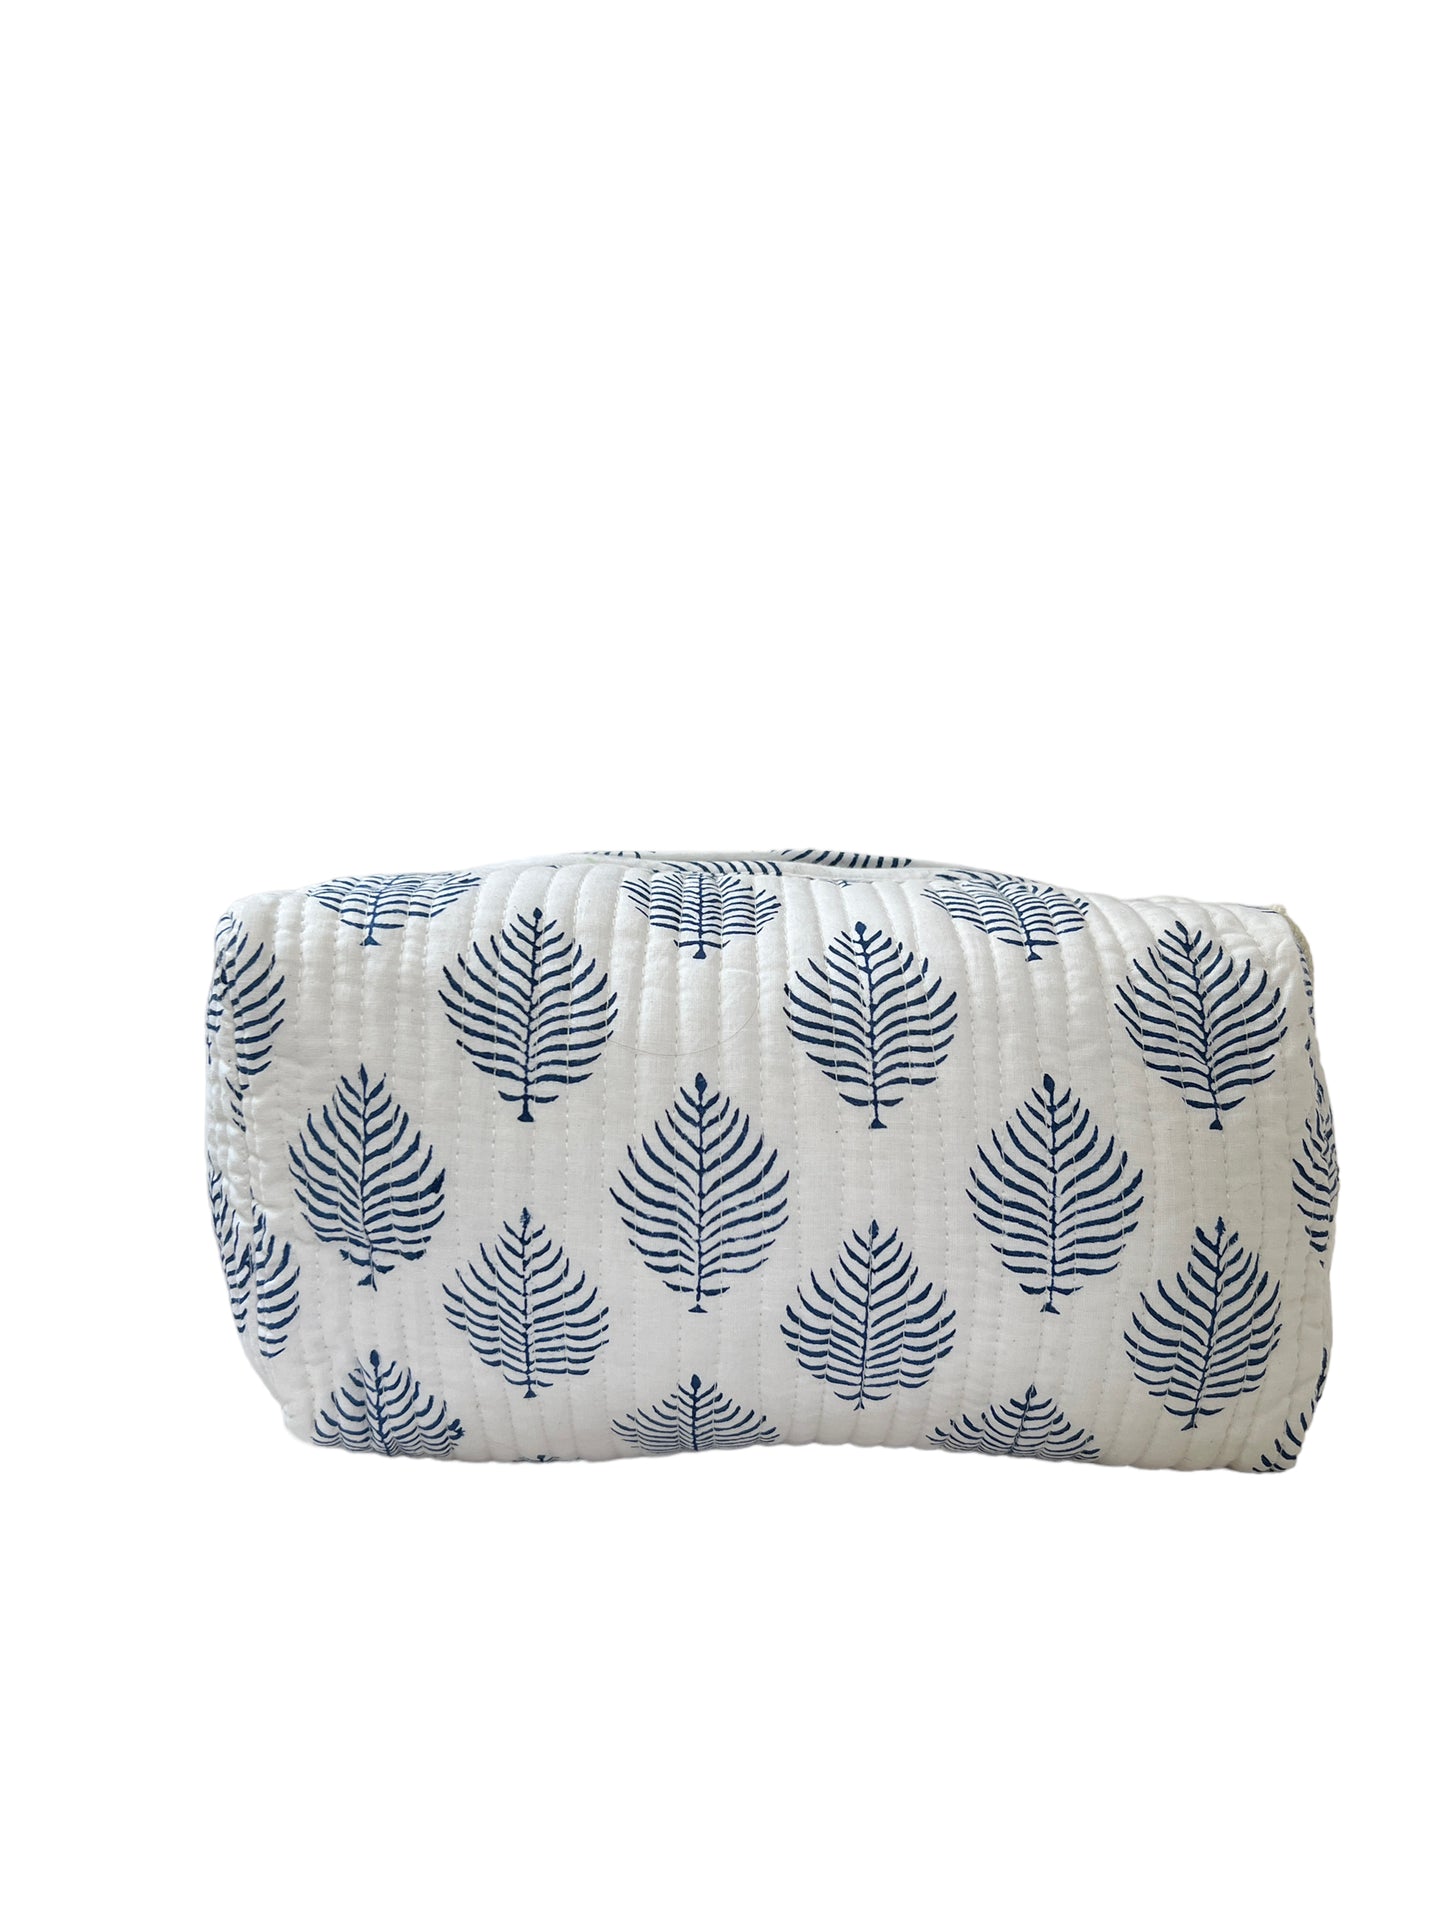 Make Up Bag Feathery Frond Blue (M004)